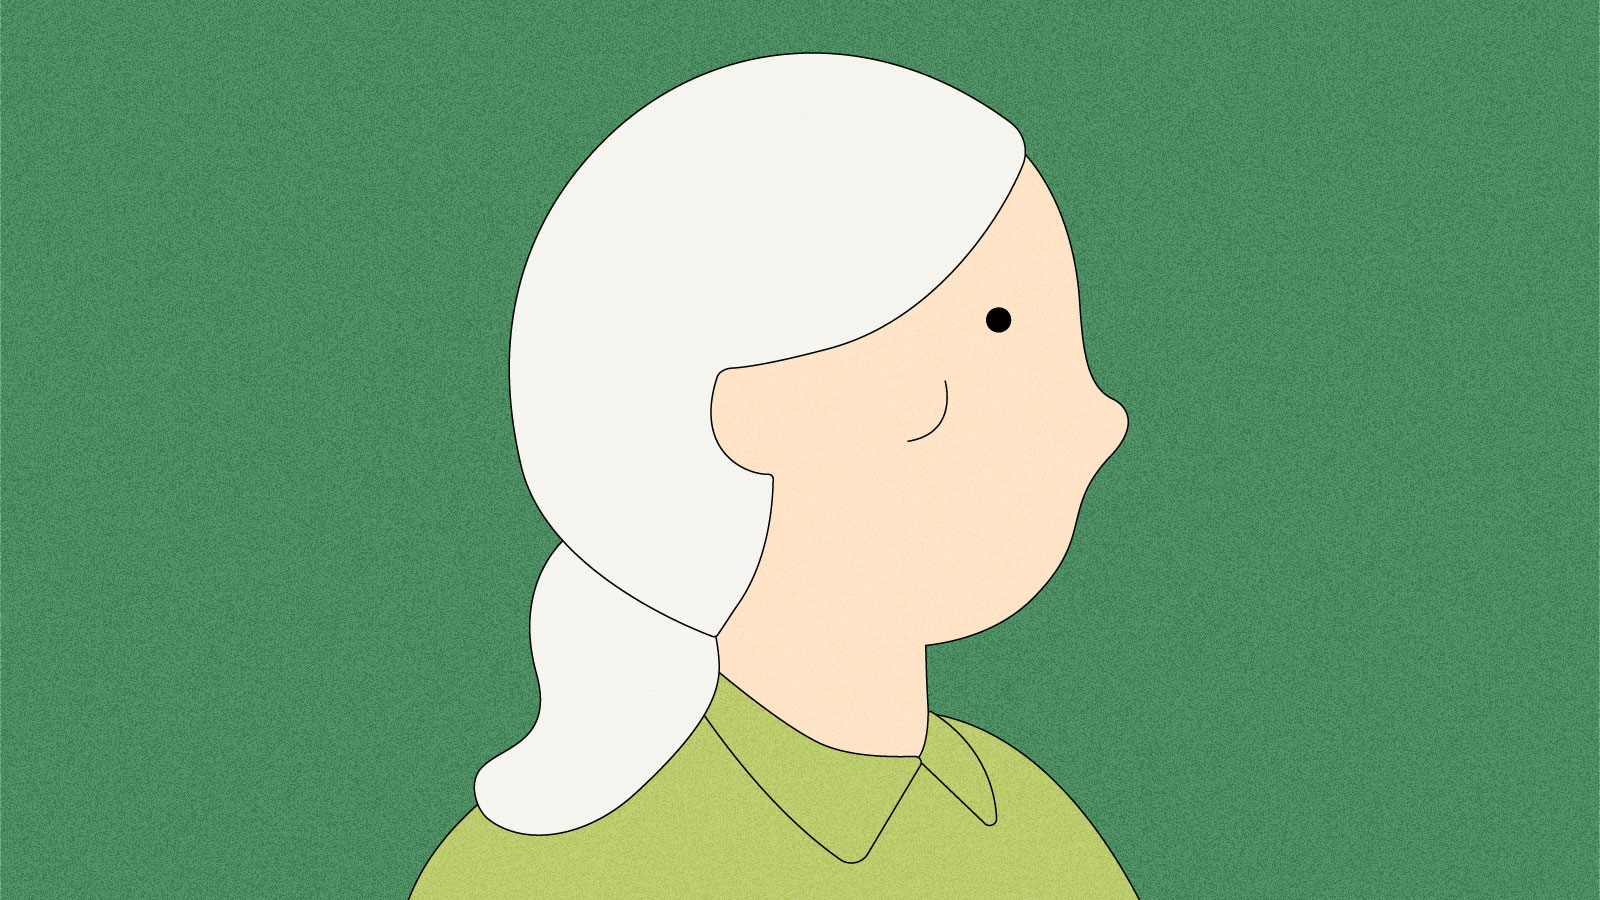 Jane Goodall’s legacy of empathy, curiosity, and courage